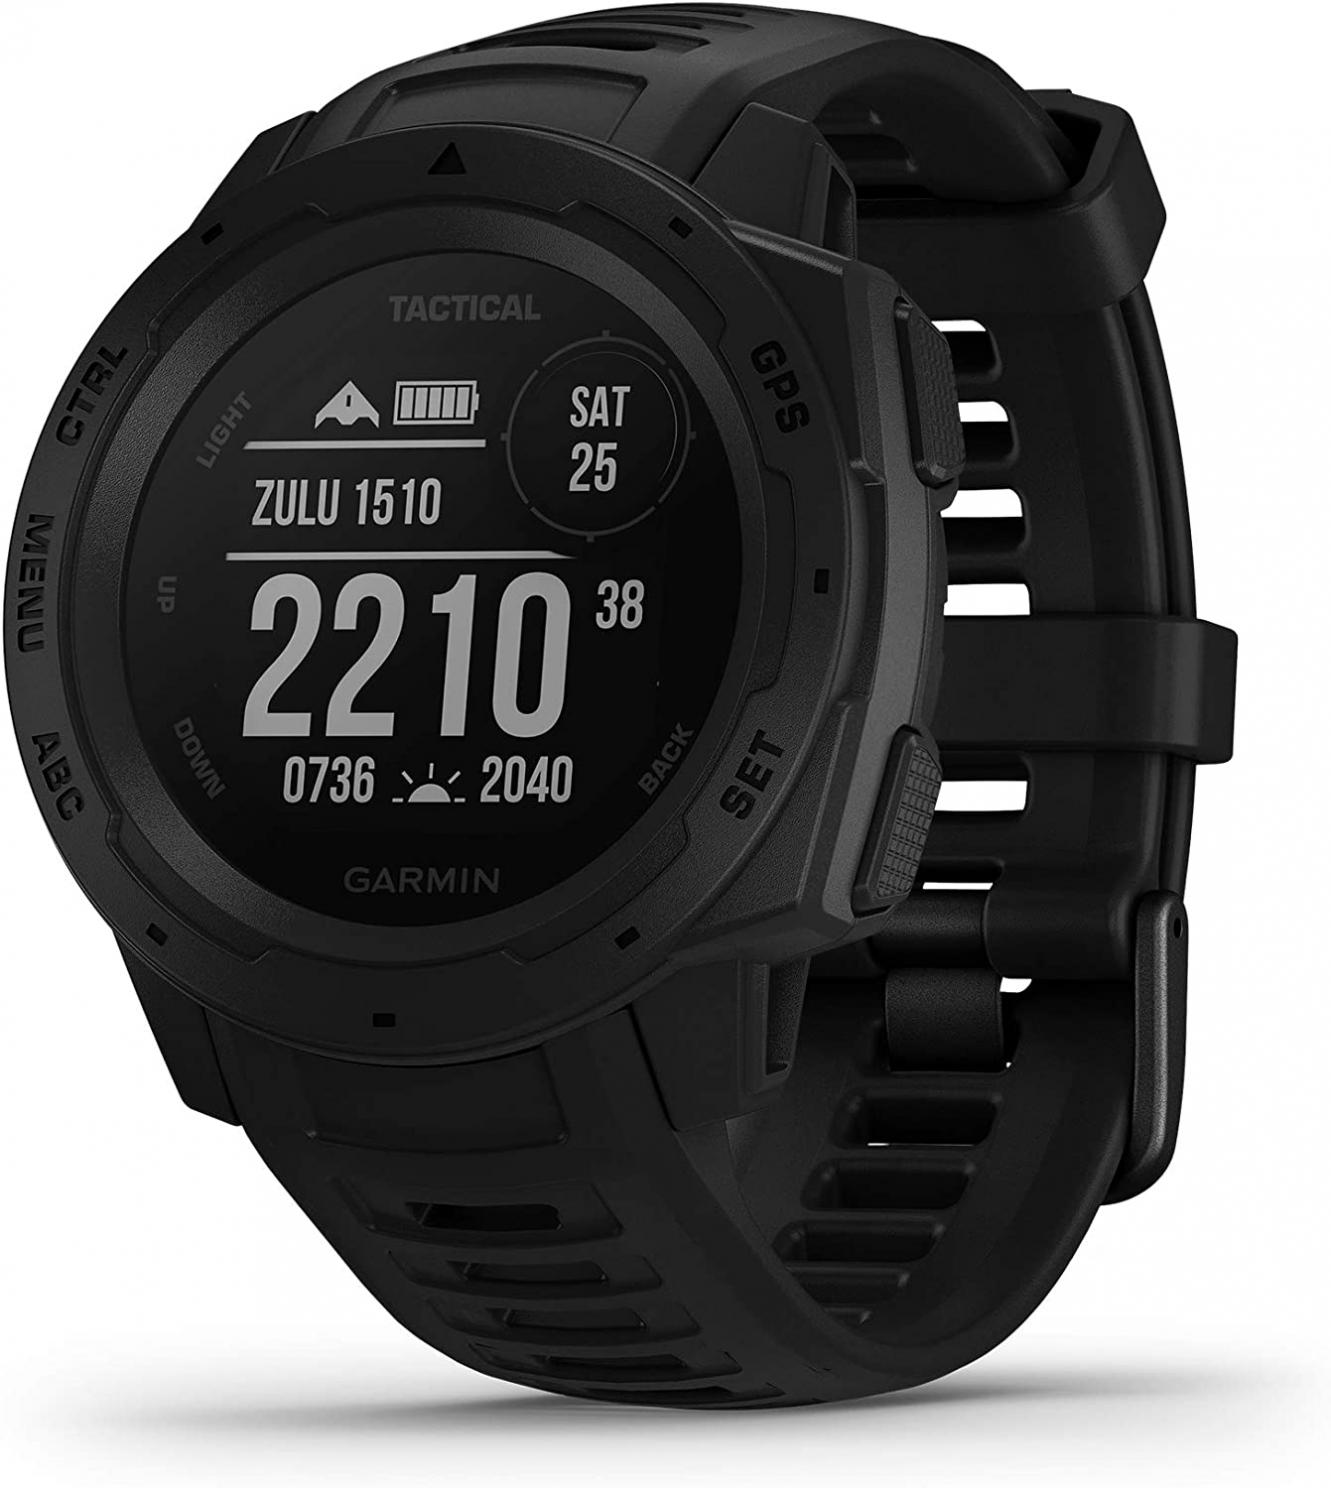 Garmin Instinct Tactical, Rugged GPS Watch, Tactical Specific Features, Constructed to U.S. Military Standard 810G for Thermal, Shock and Water Resistance, Black